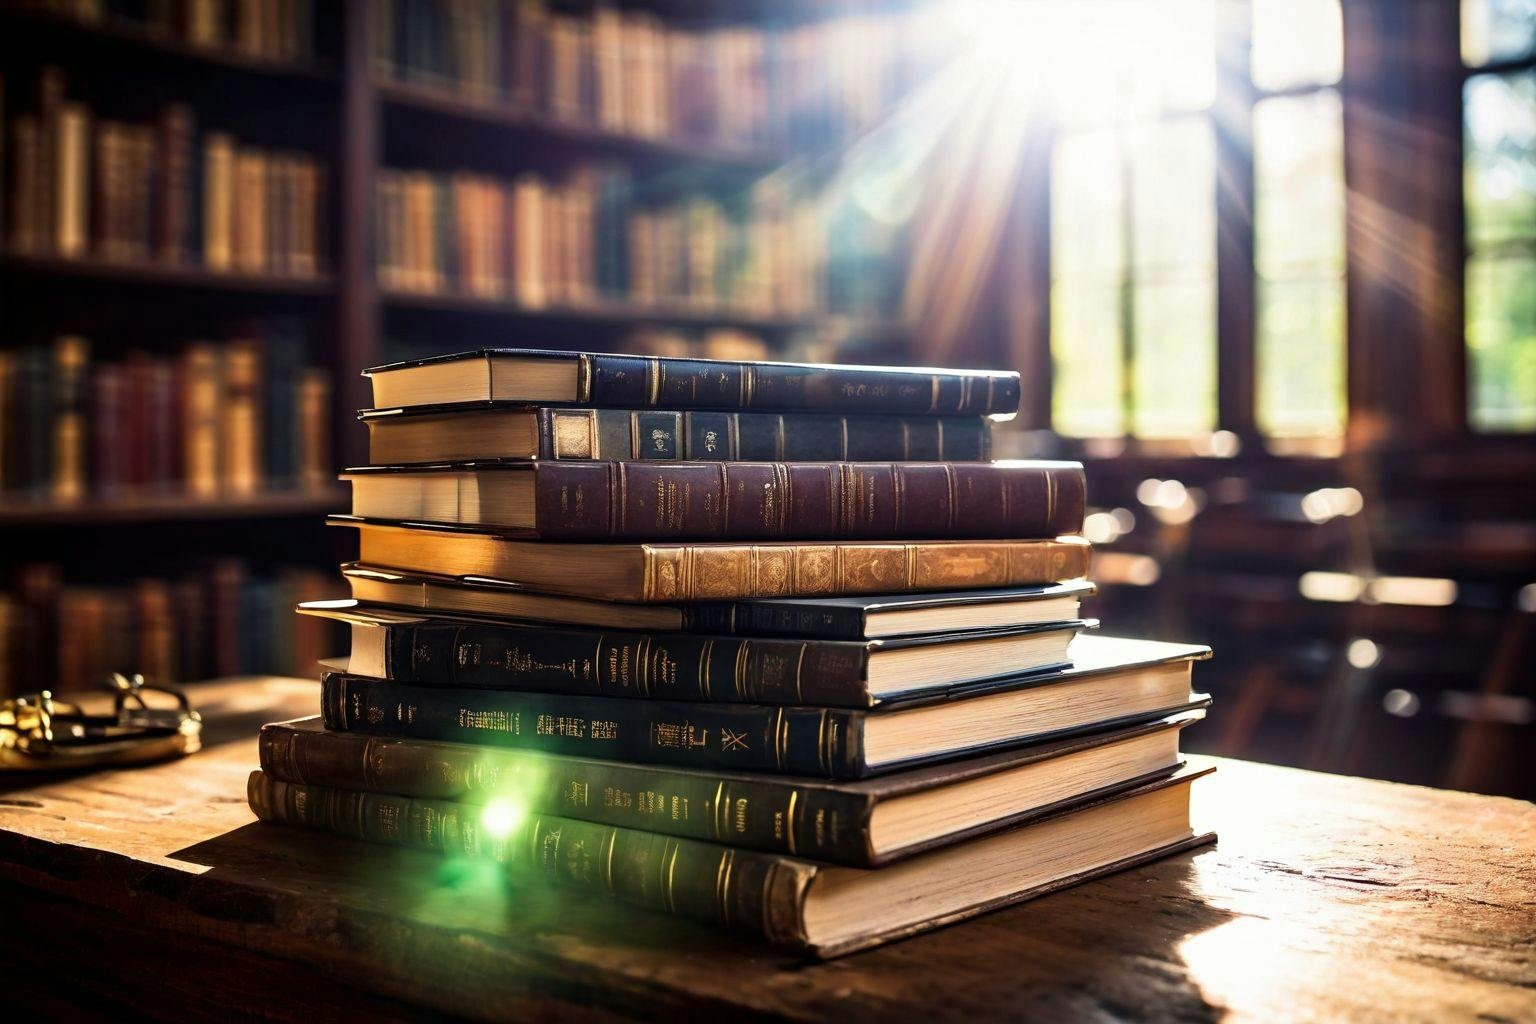 Stacks of books with a solid foundation on a wooden desk, one book open with highlighted text, in a library setting, with natural light, Photographic, Photography capturing the depth of the stacks and the open book's detail.